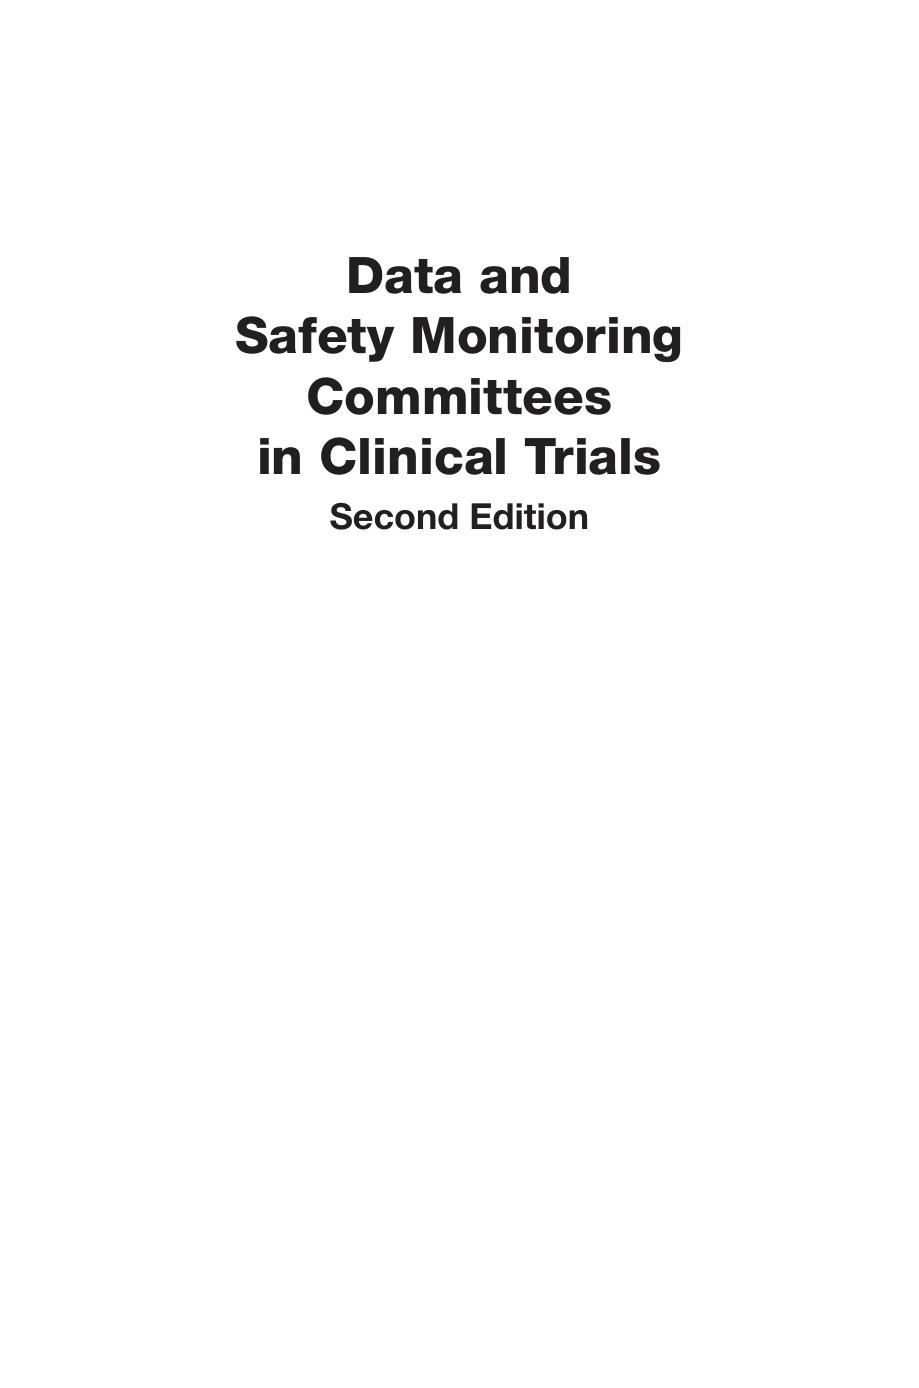 Data and Safety Monitoring Committees in Clinical Trials 2nd ed. 2016.pdf